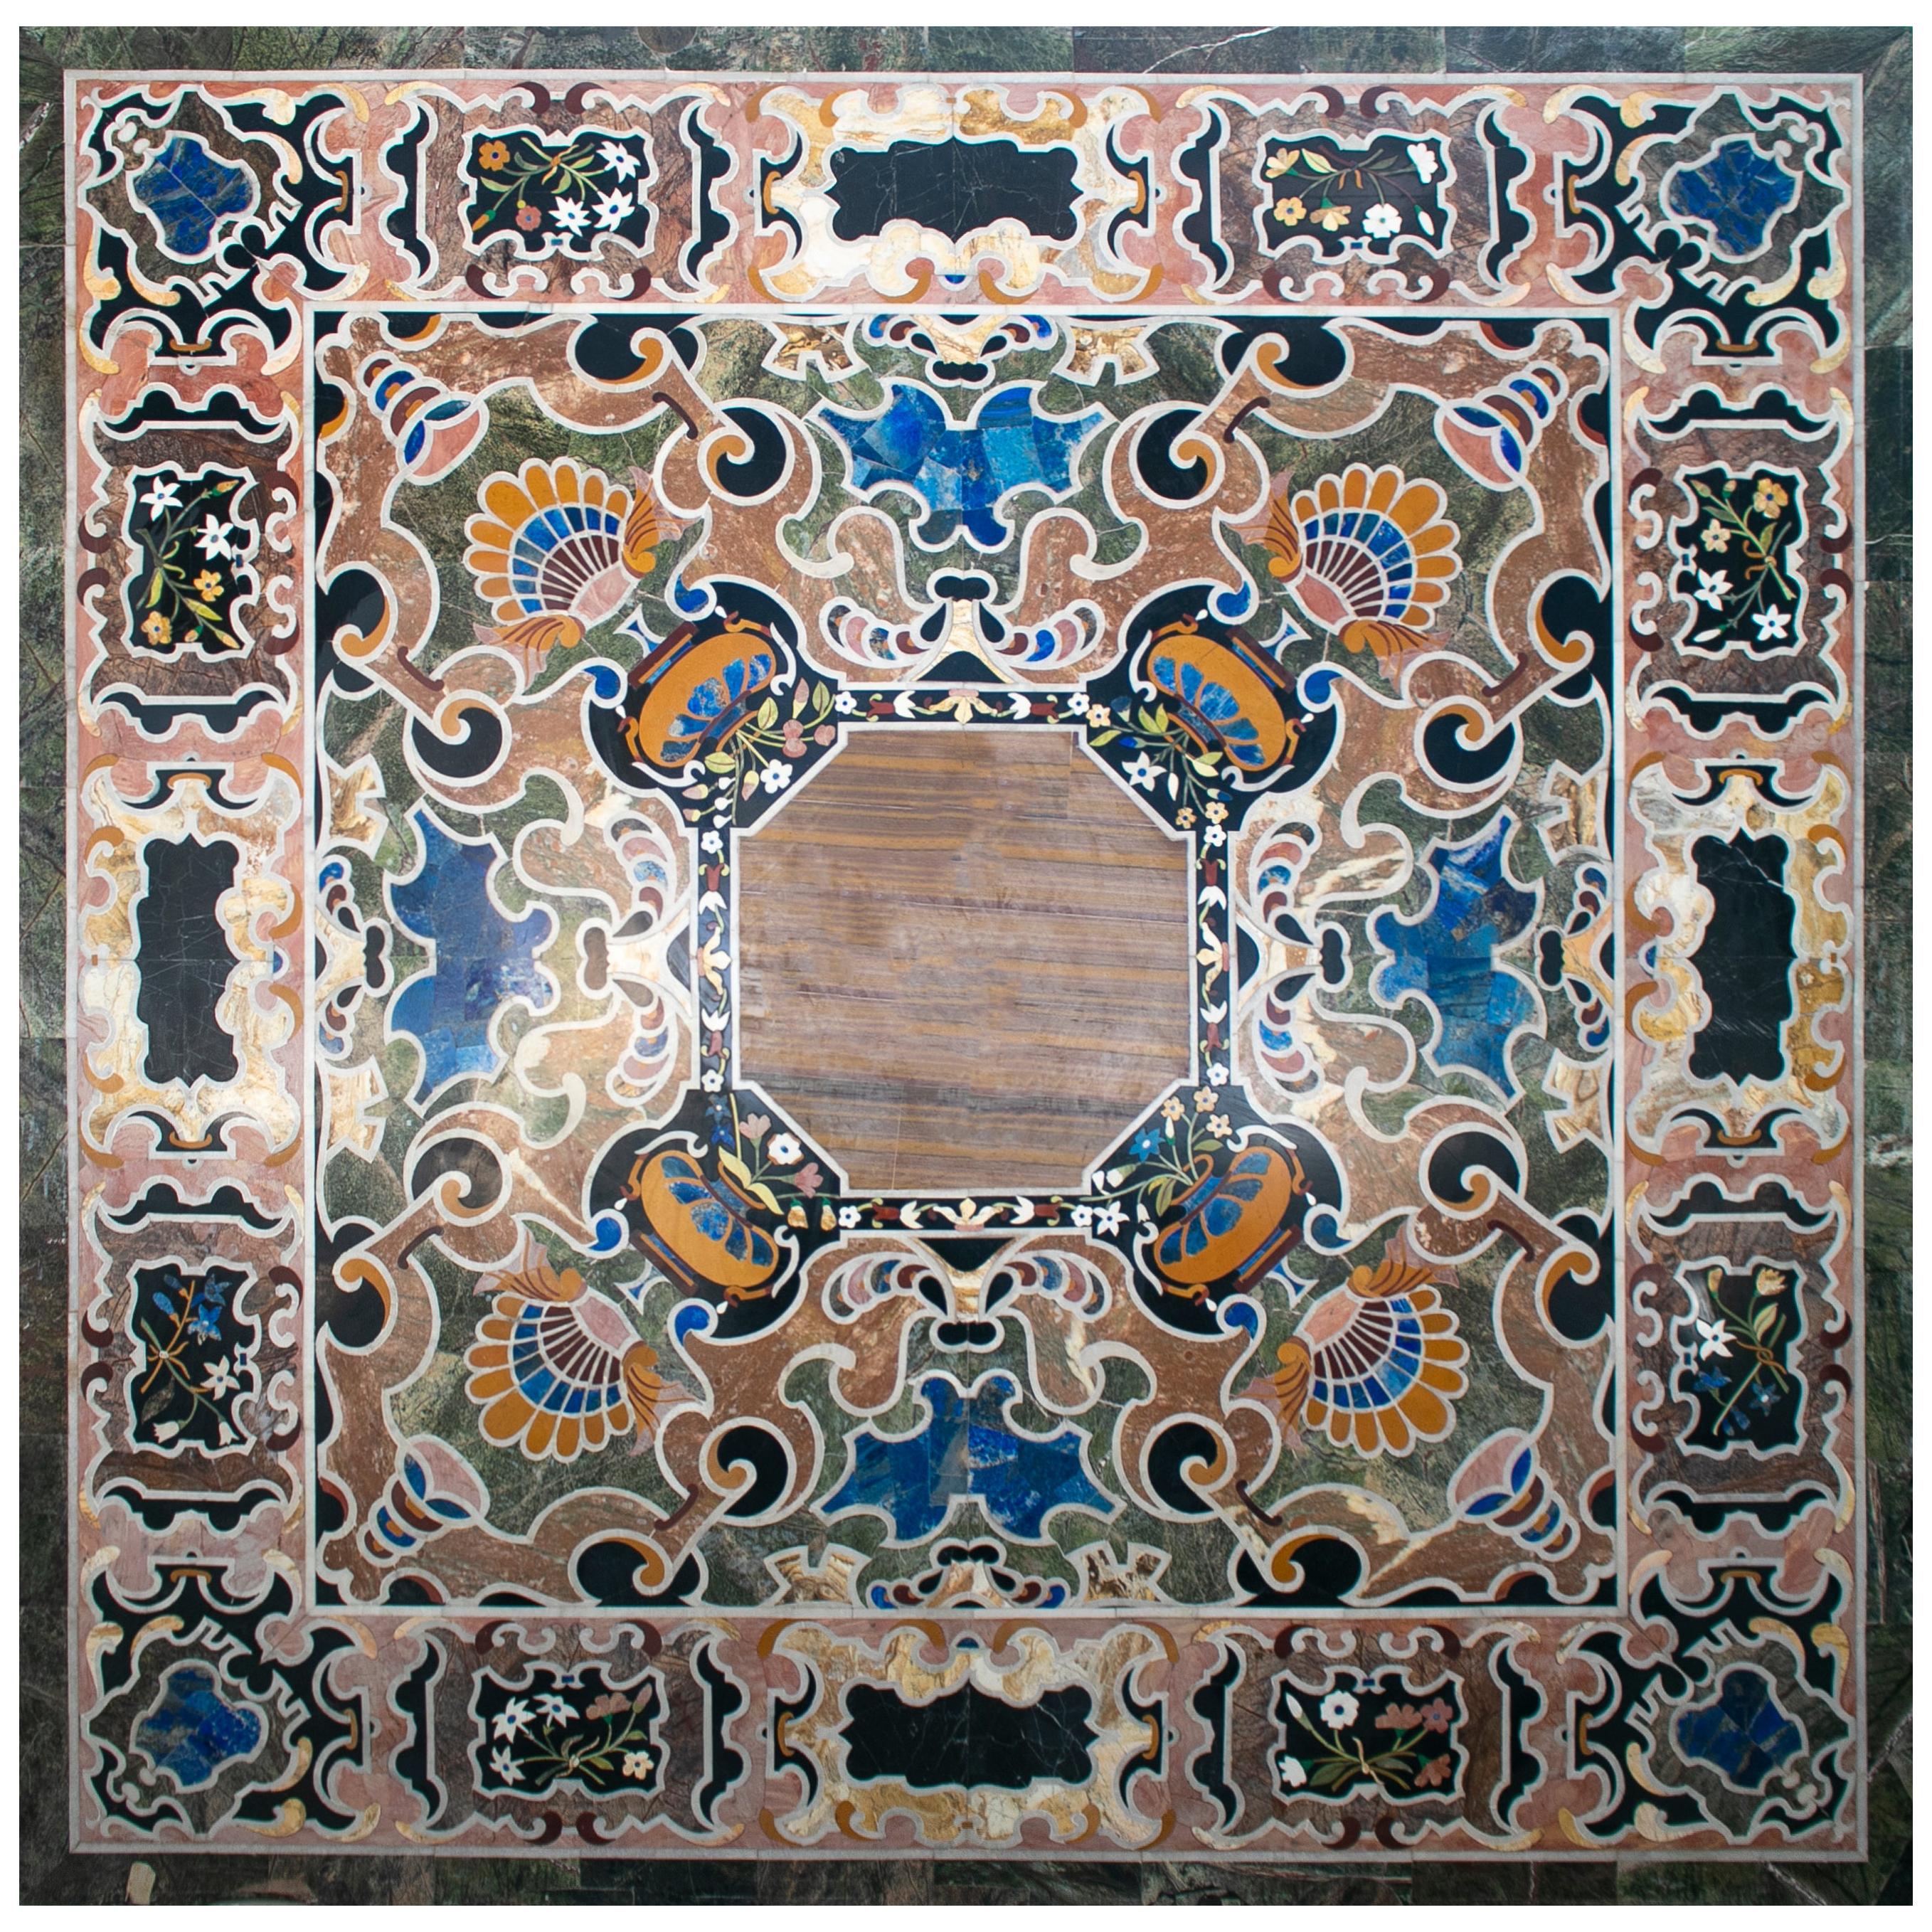 Details about   Exclusive Marble Dining Table Top Lapis Lazuli Mosaic Inlay Outdoor Decor H2042 